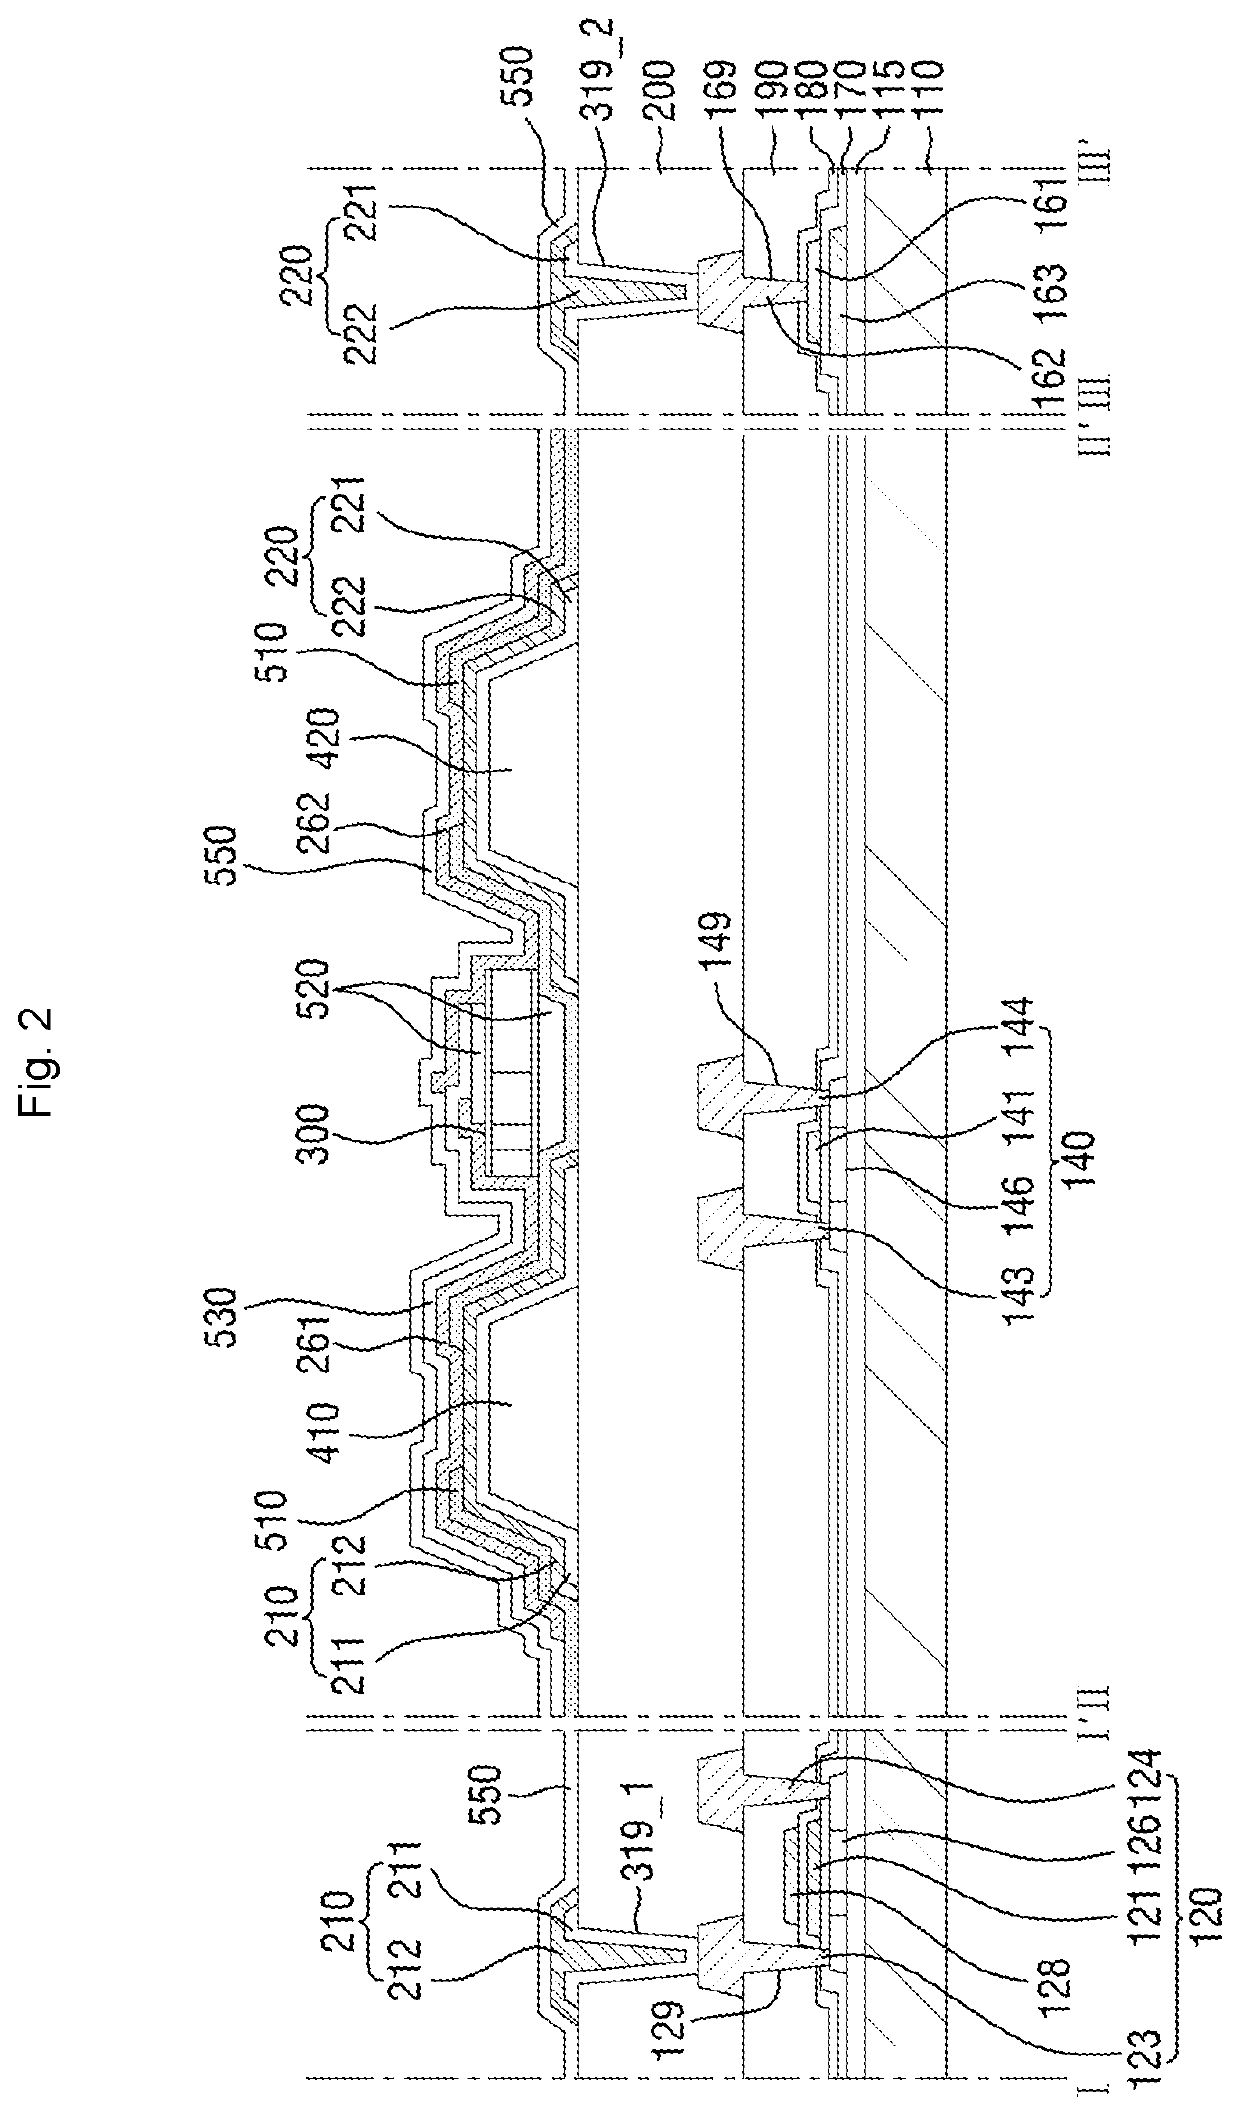 Light emitting element, display device including the same, and method for manufacturing the display device